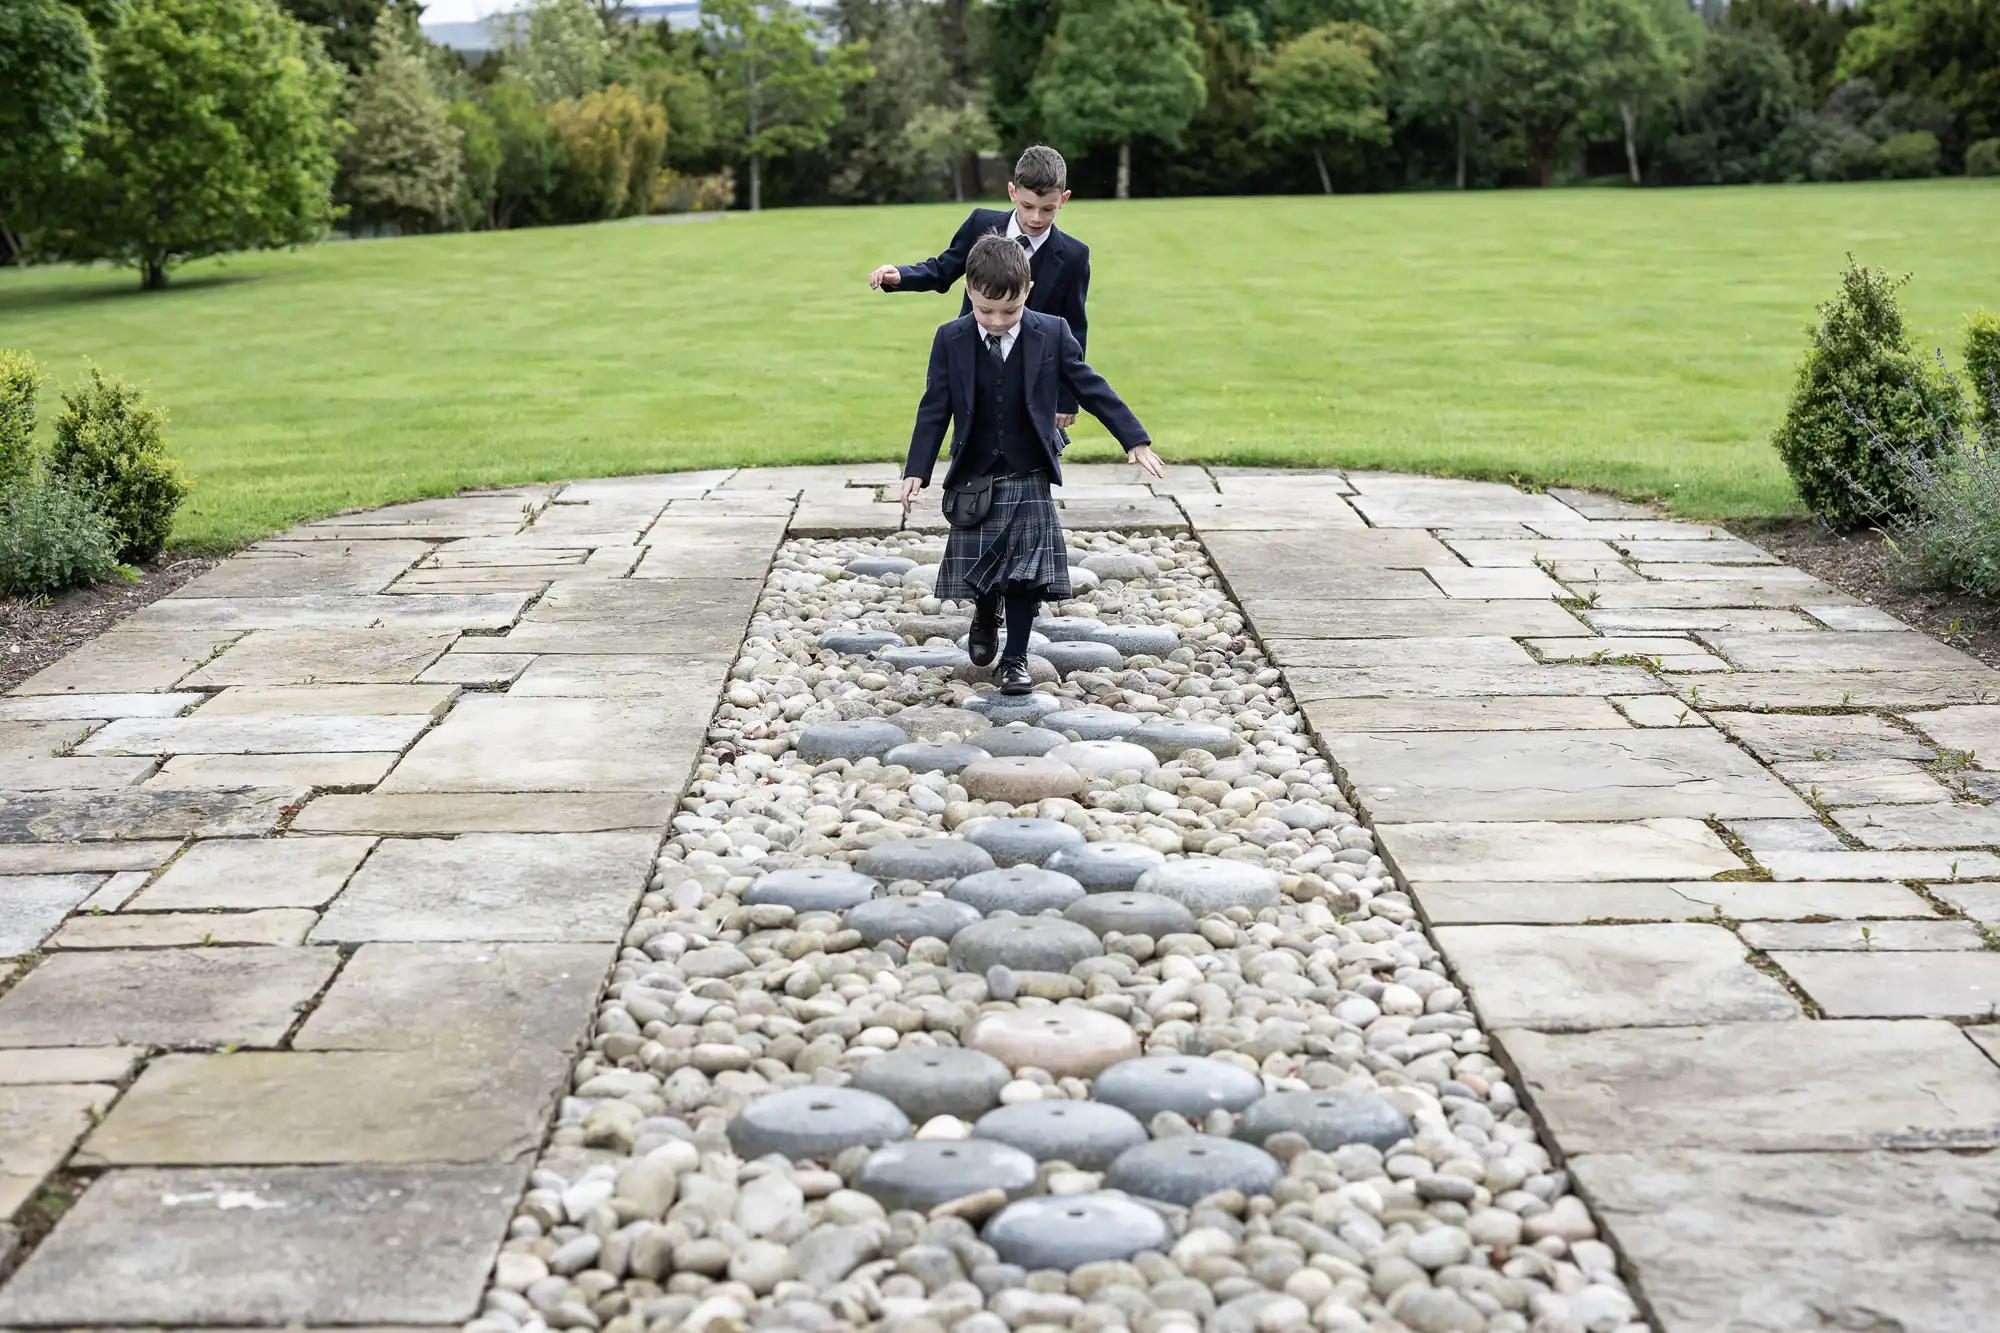 Two children in school uniforms playing on a stone path lined with pebbles and grass in a landscaped garden.